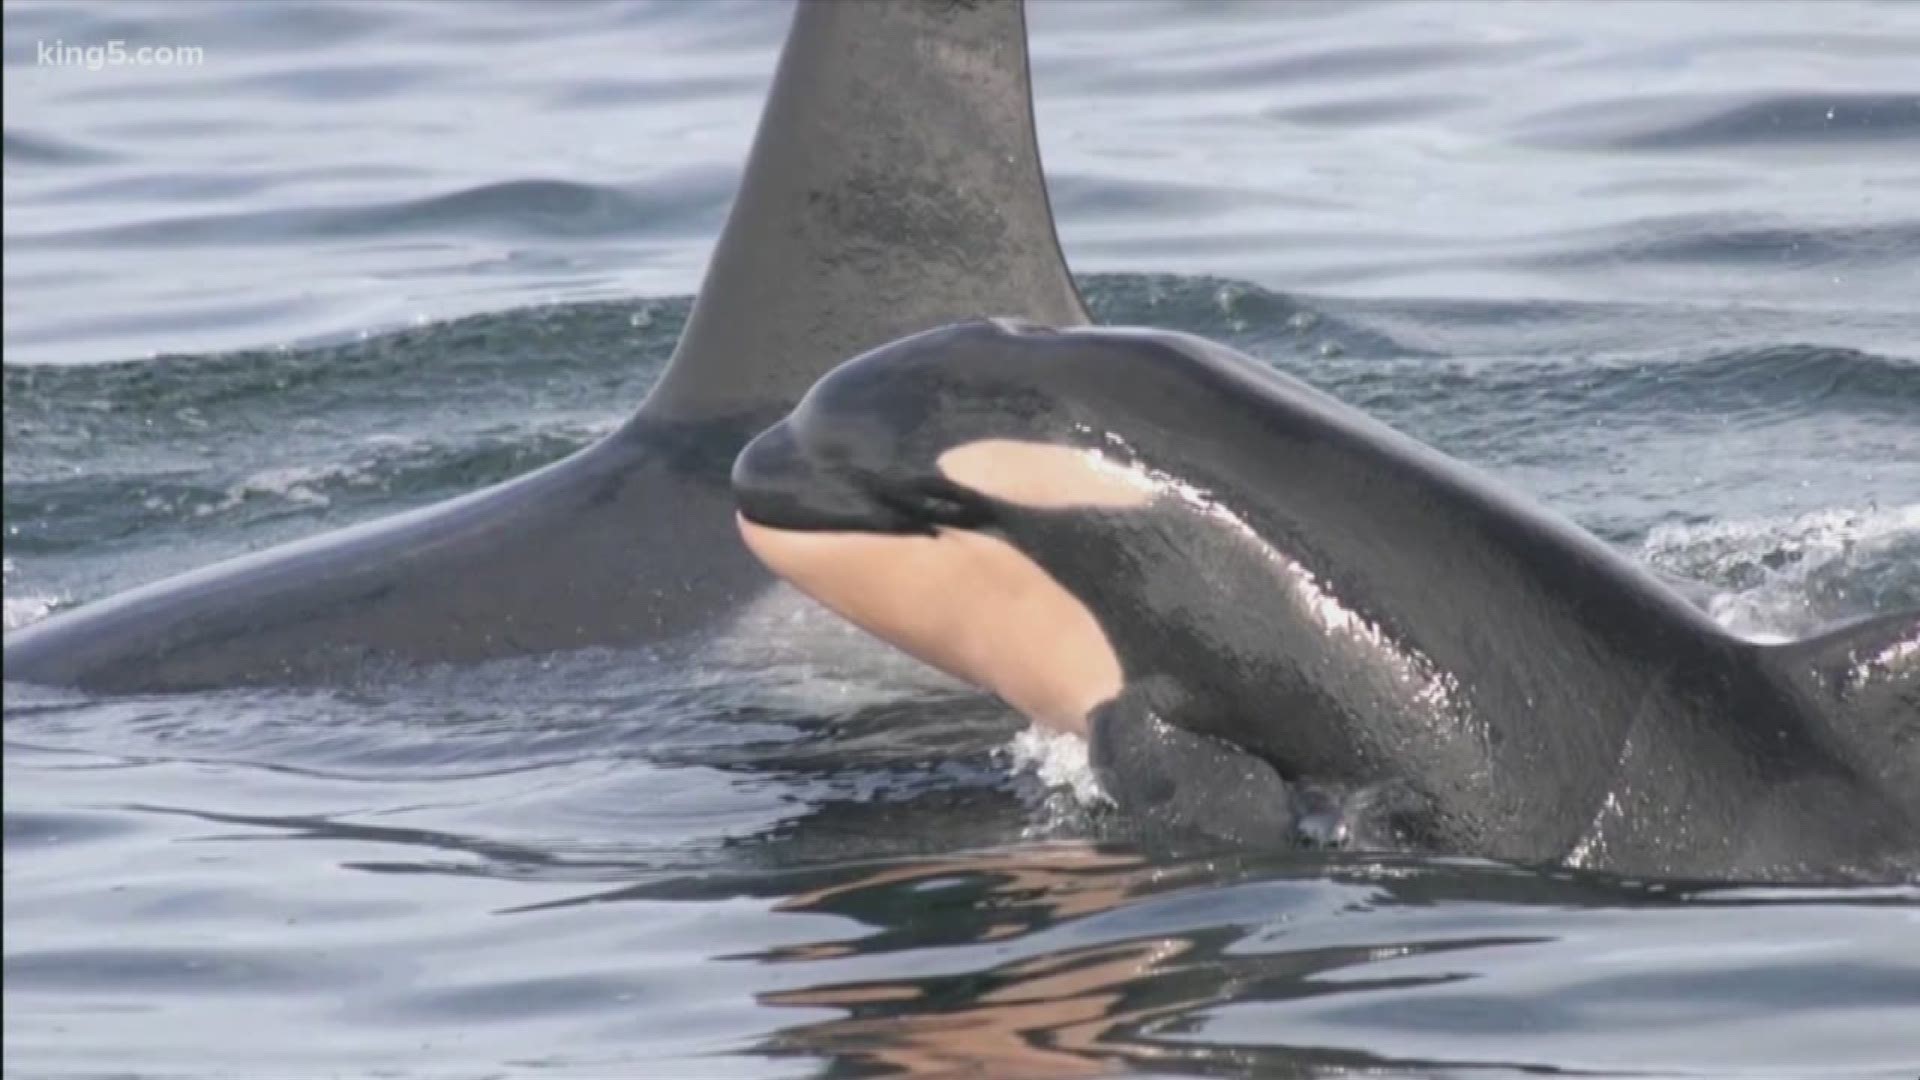 The majority of Southern Resident killer whale pregnancies end in miscarriage. Scientists are studying their scat to figure out why. KING 5 environment reporter Alison Morrow explains.